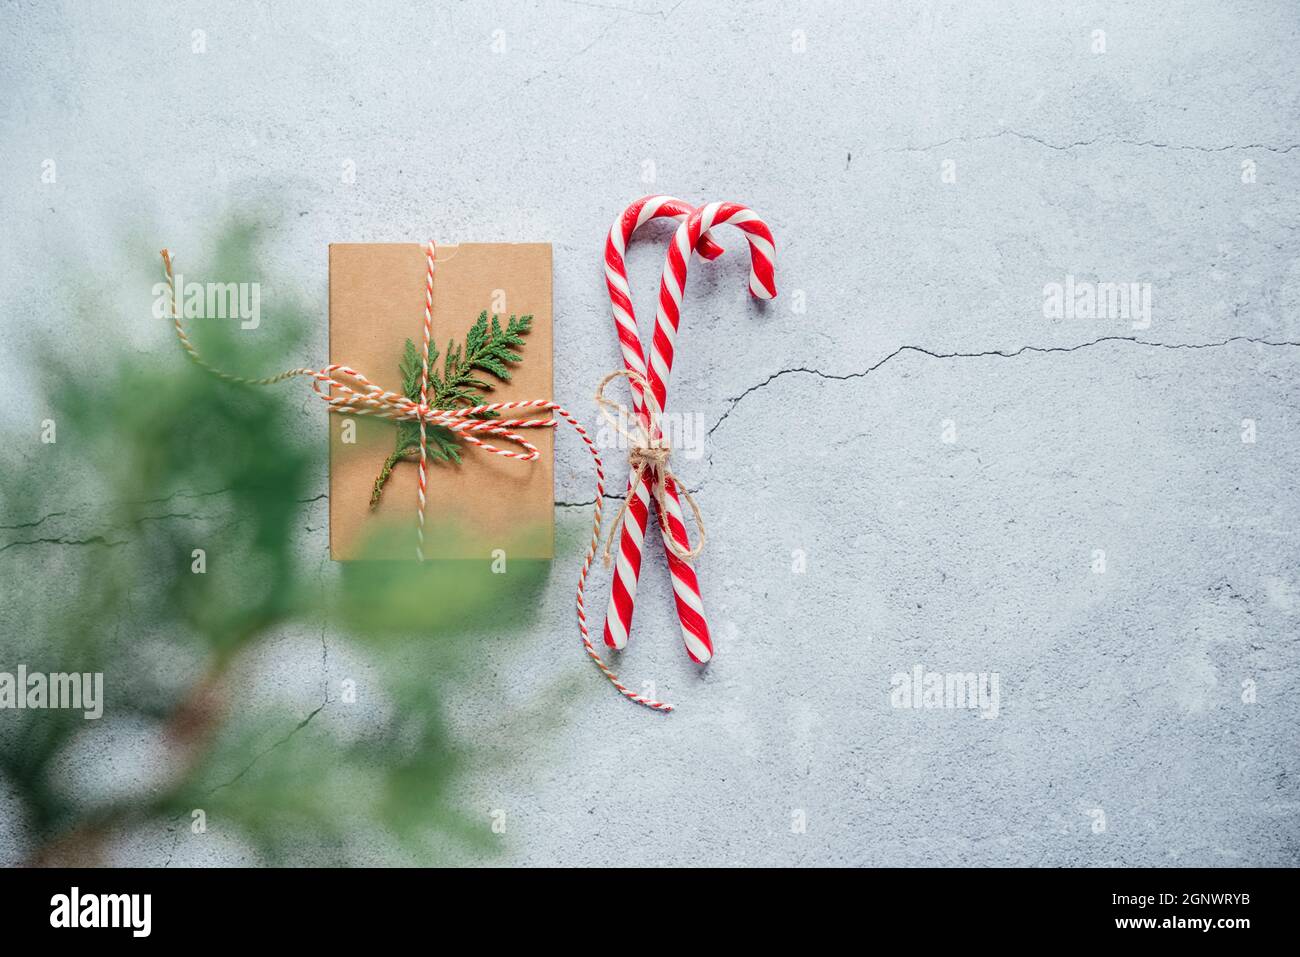 New Year composition with Christmas gift box, pine cones, and thuja branches on gray cement background with copy space Stock Photo